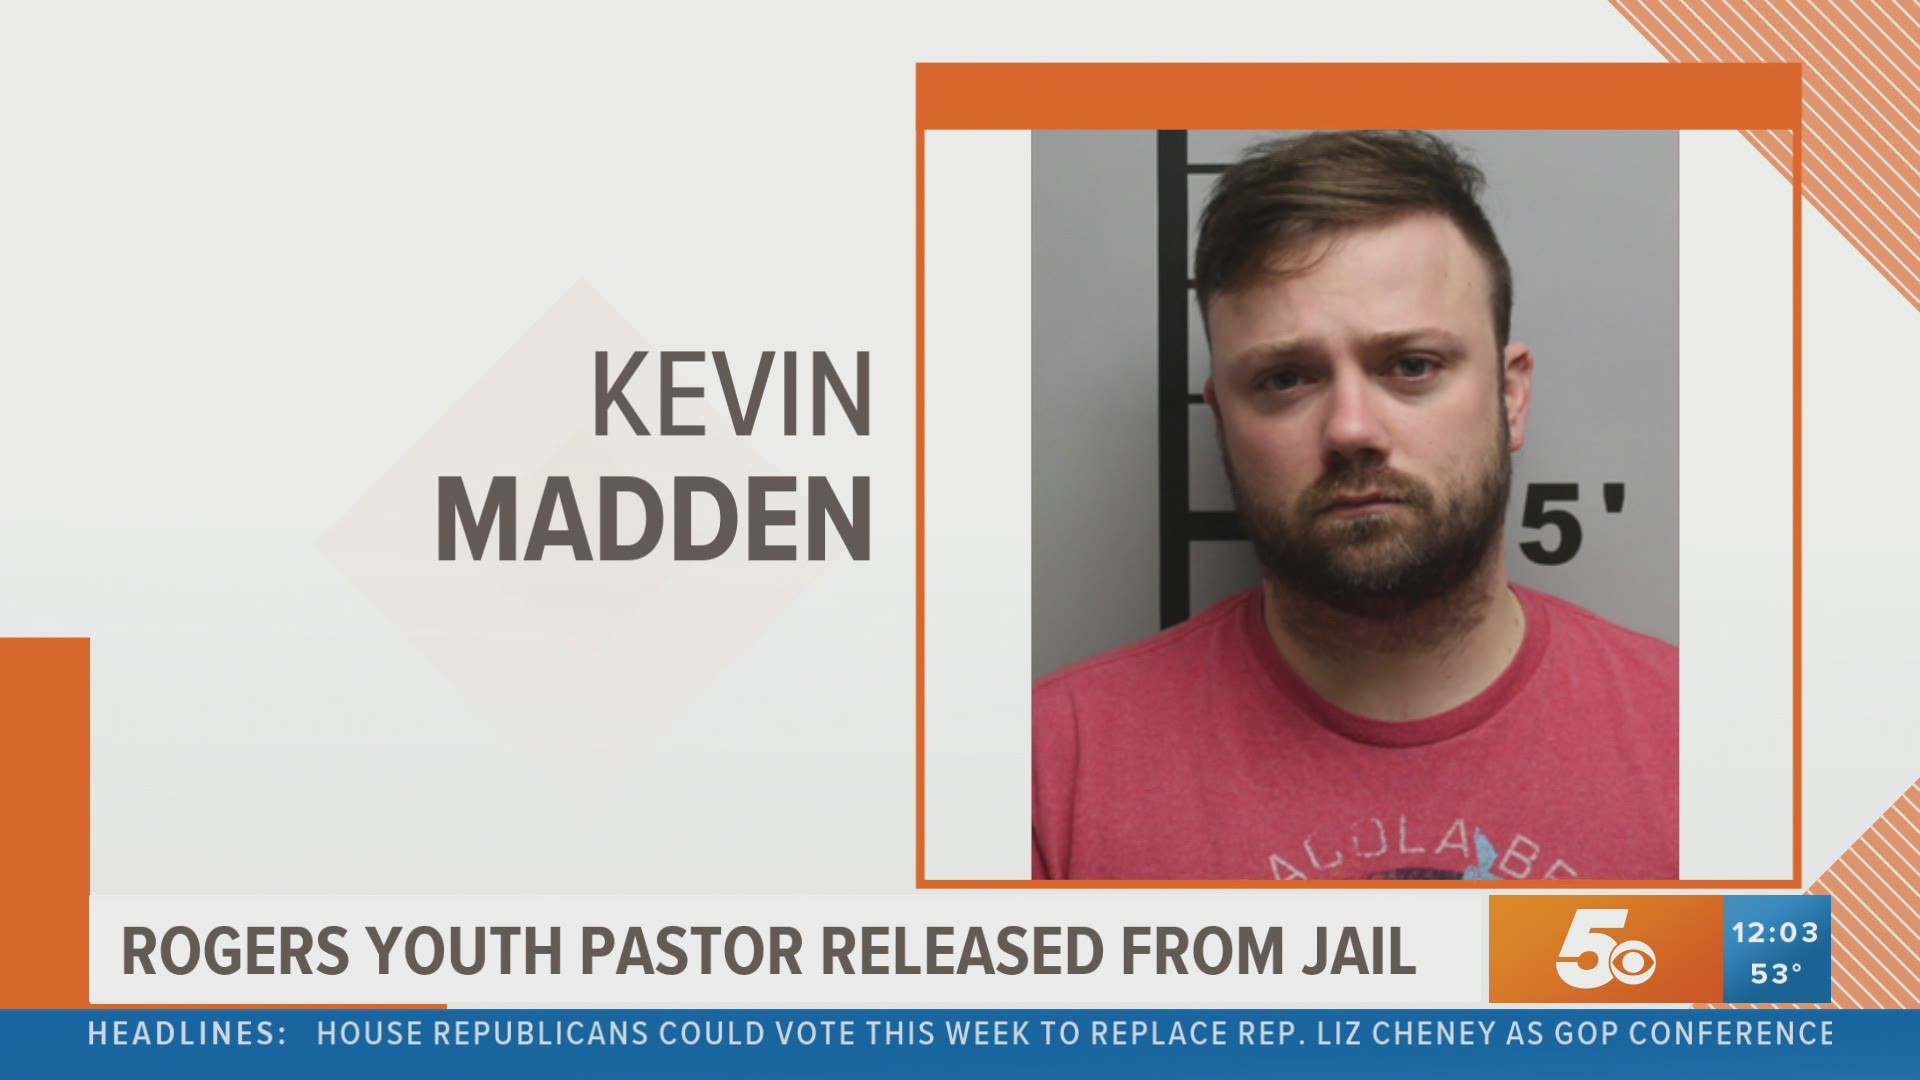 Police: youth pastor steals phone, calls back to apologize and return it,  gets arrested